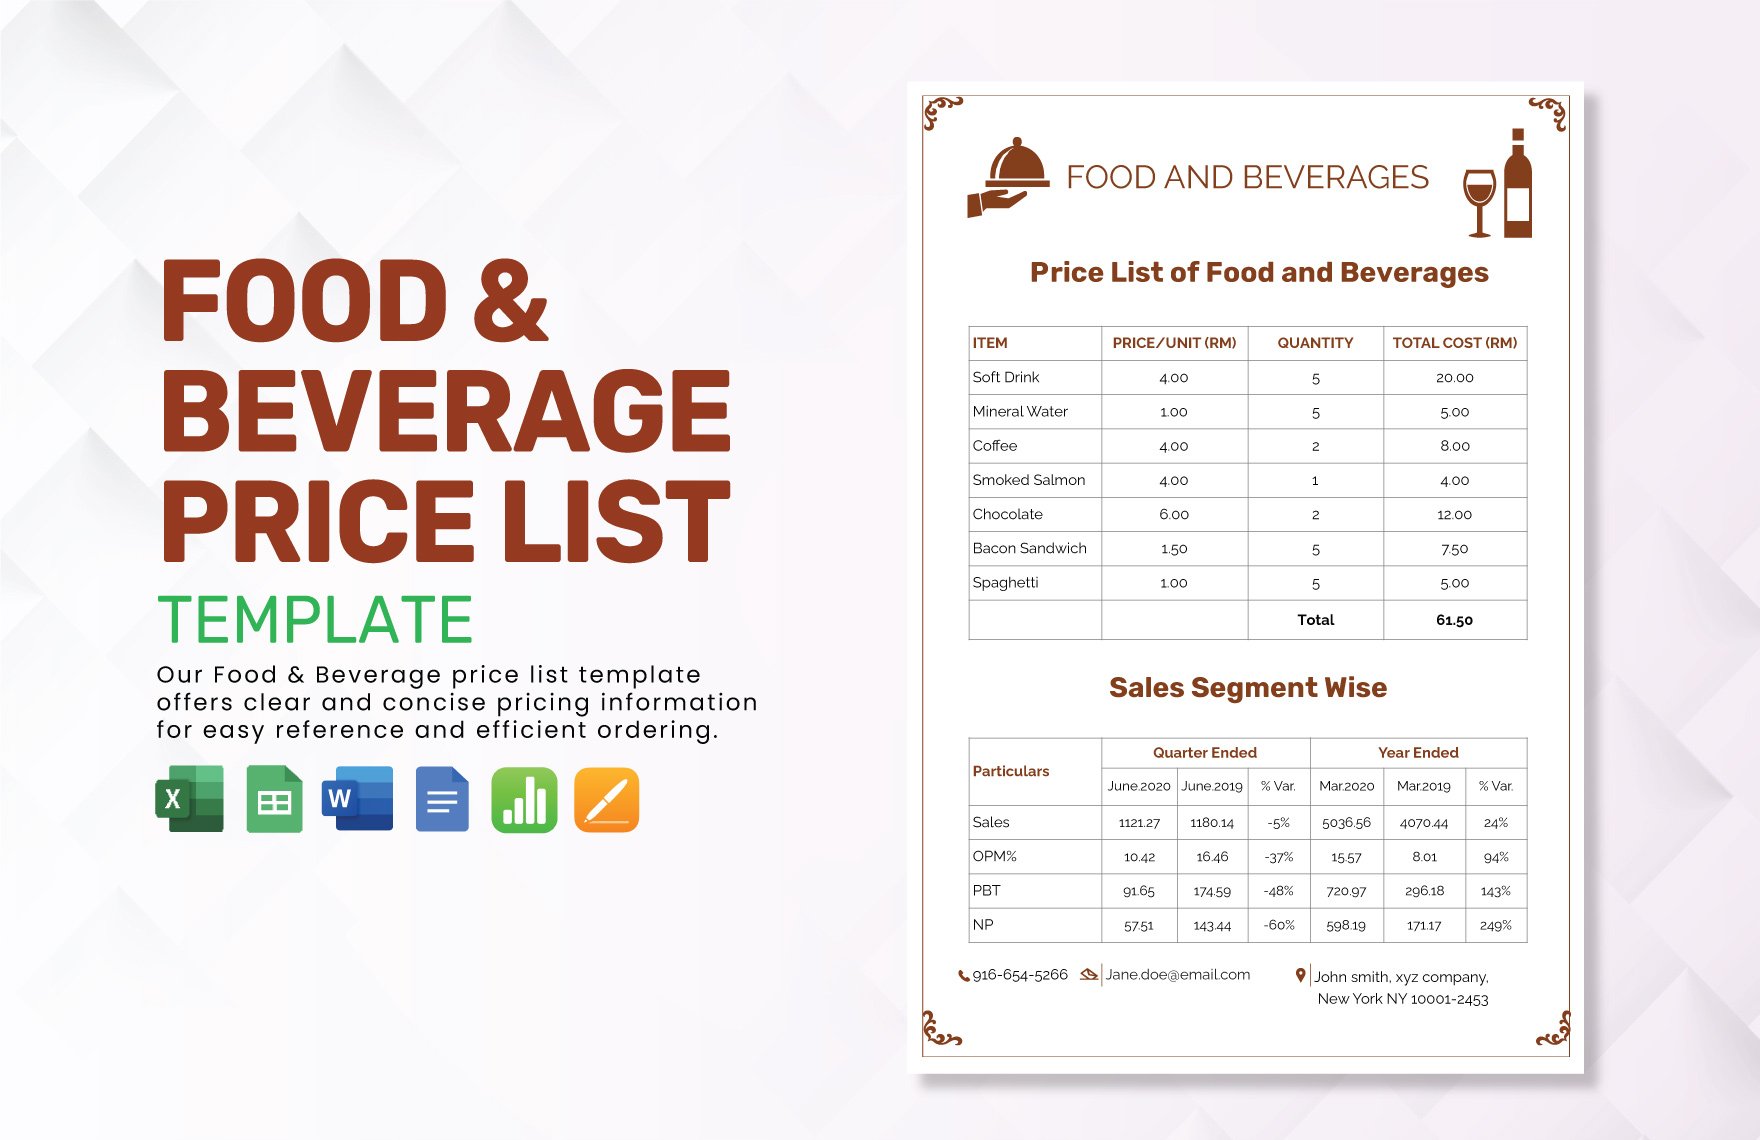 Food & Beverage Price List Template in Word, Google Docs, Excel, Google Sheets, Apple Pages, Publisher, Apple Numbers